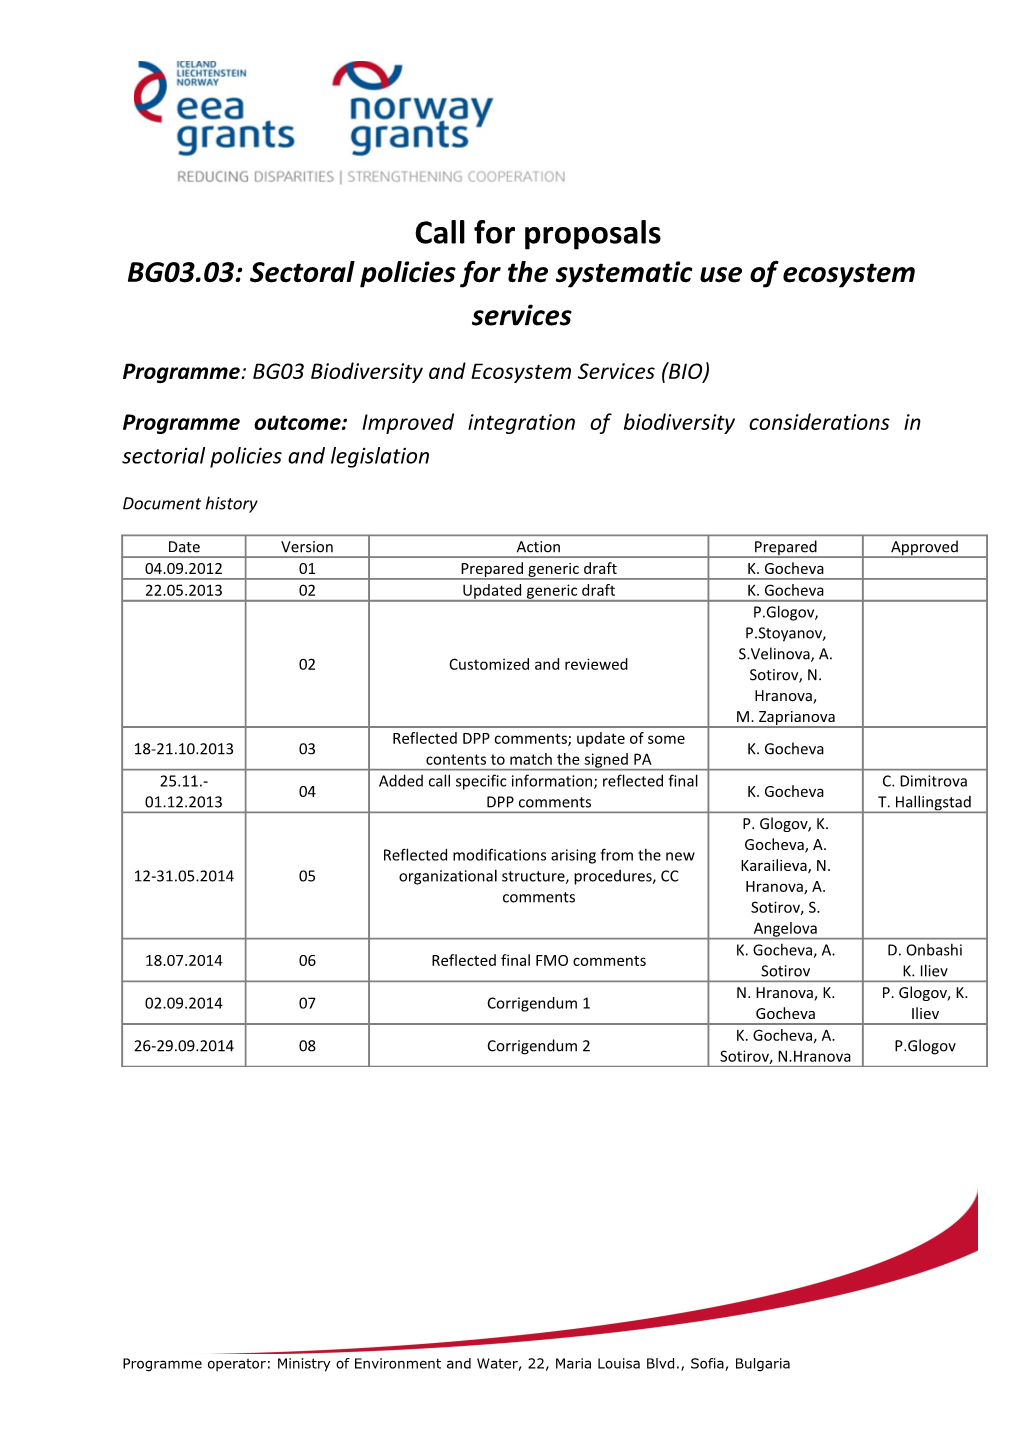 BG03.03: Sectoral Policies for the Systematic Use of Ecosystem Services